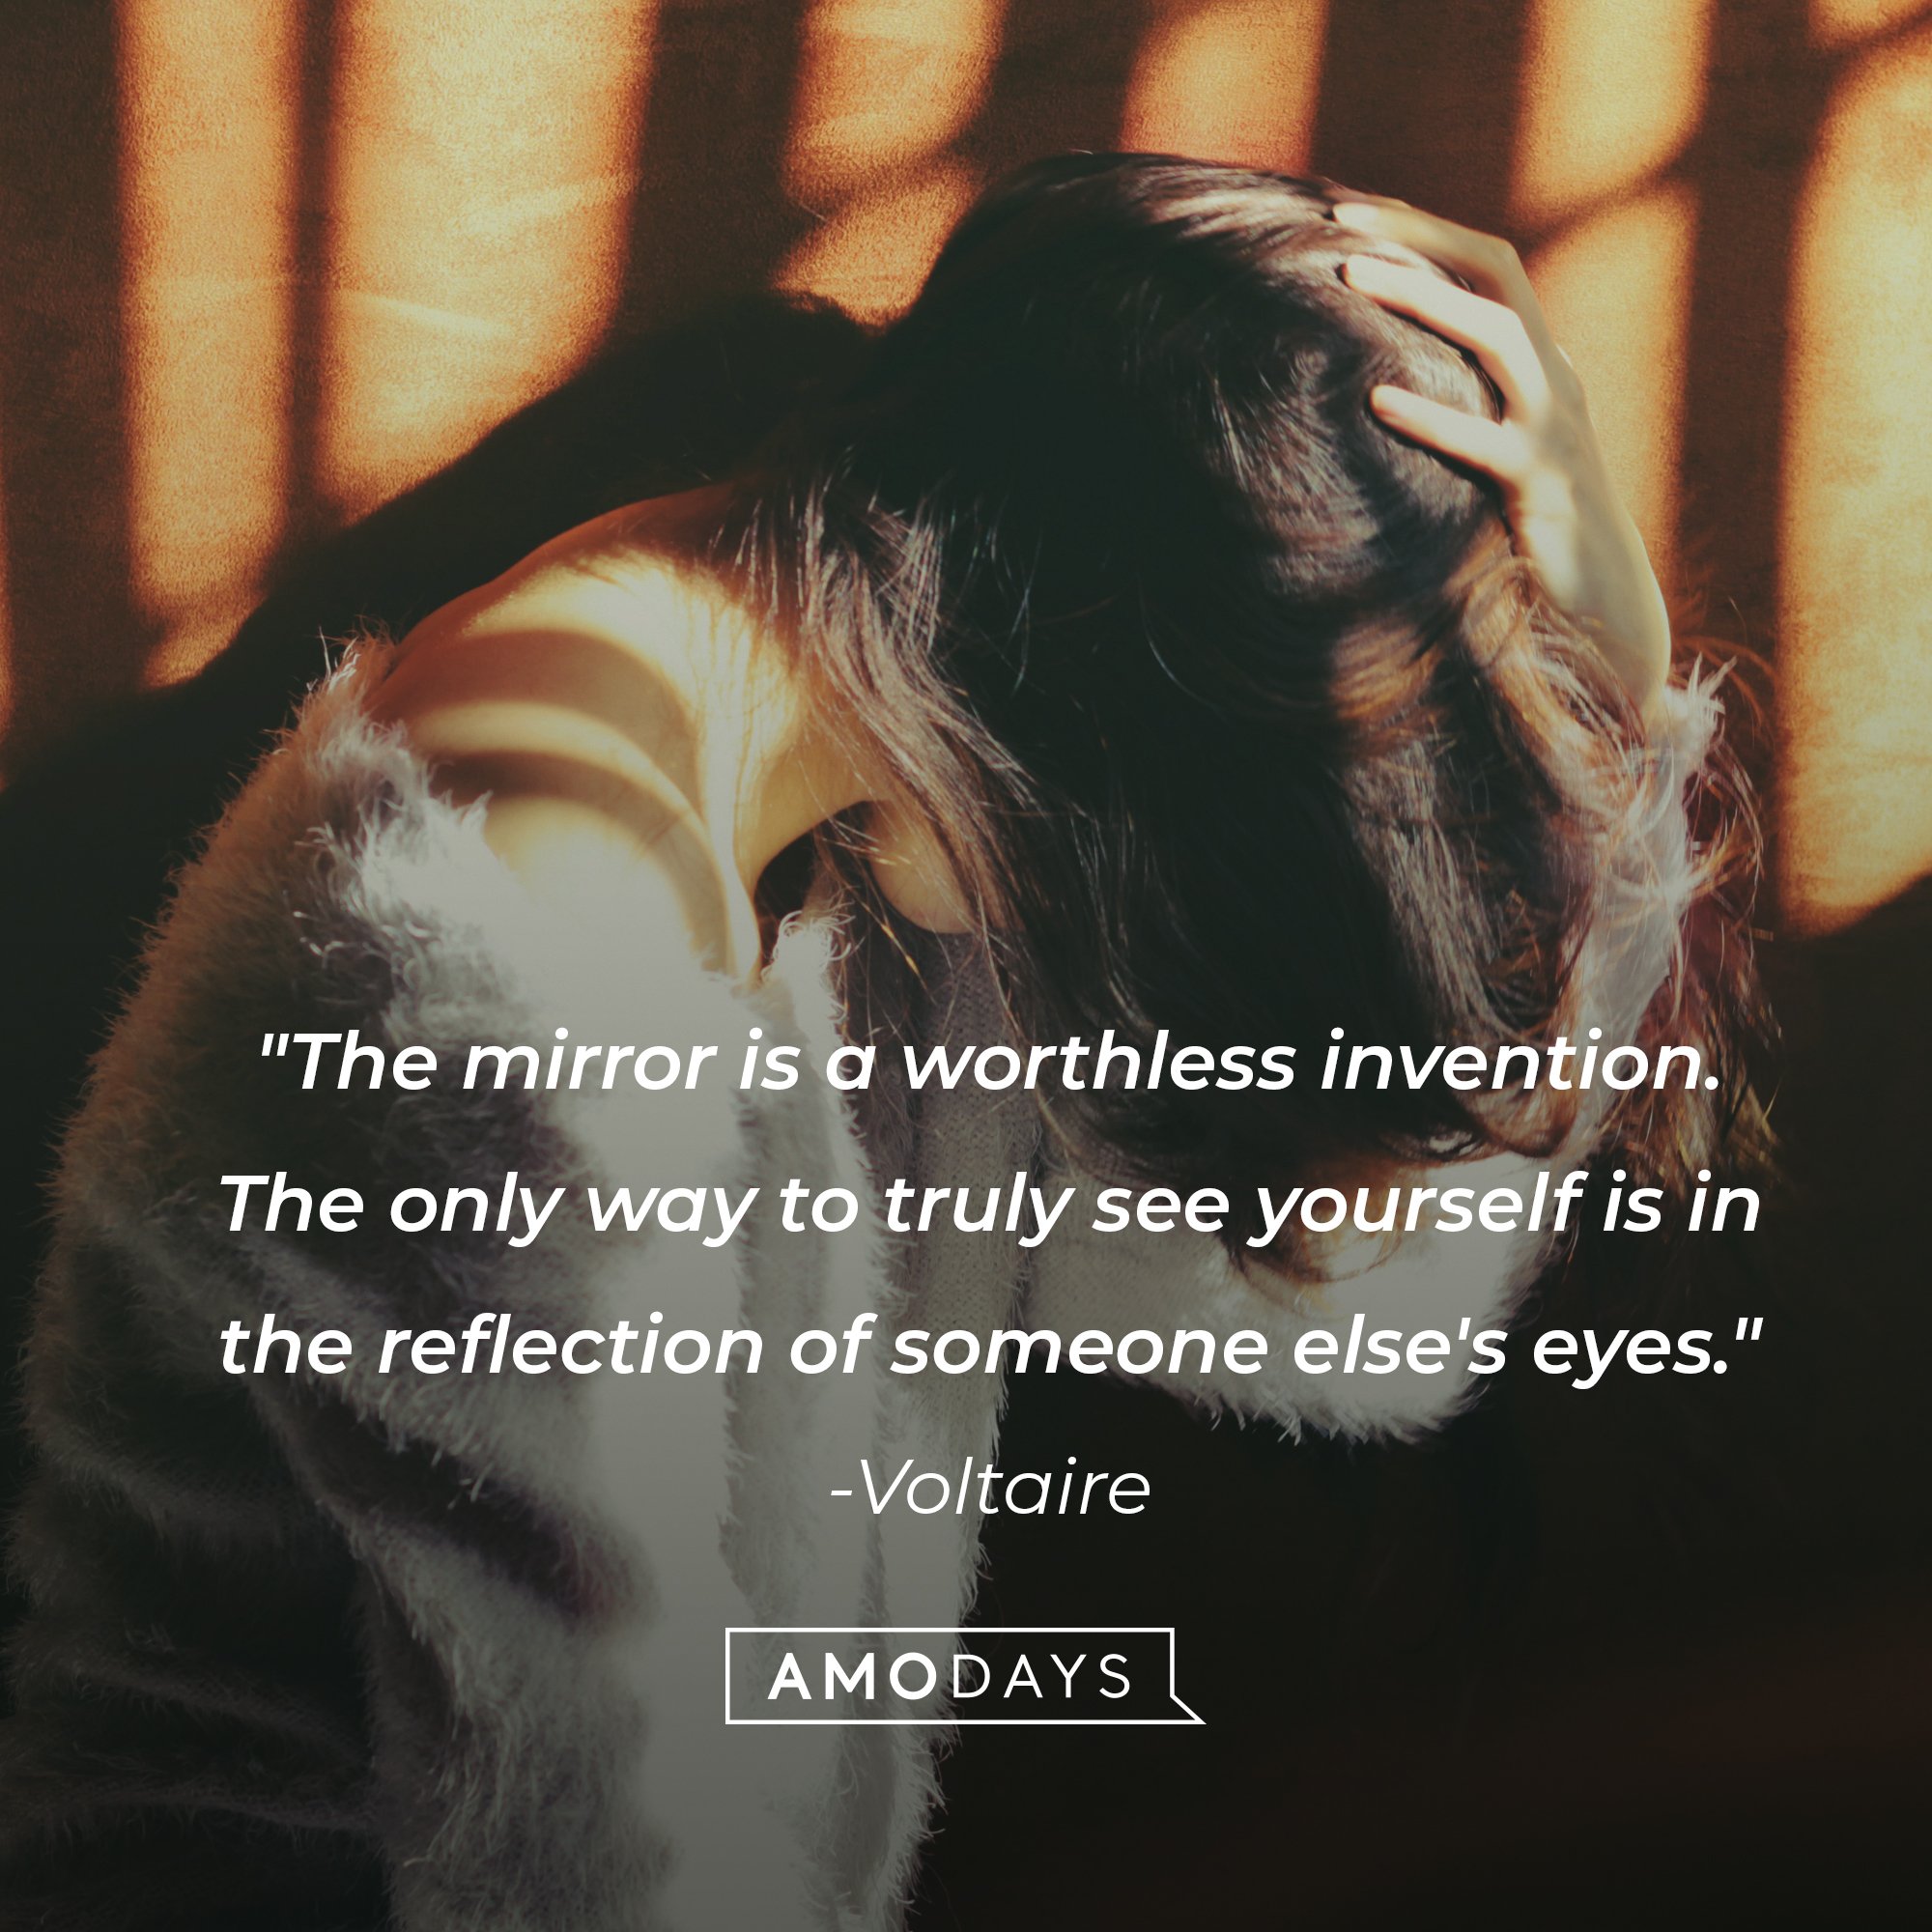 Voltaire's quote: "The mirror is a worthless invention. The only way to truly see yourself is in the reflection of someone else's eyes." | Image: AmoDays